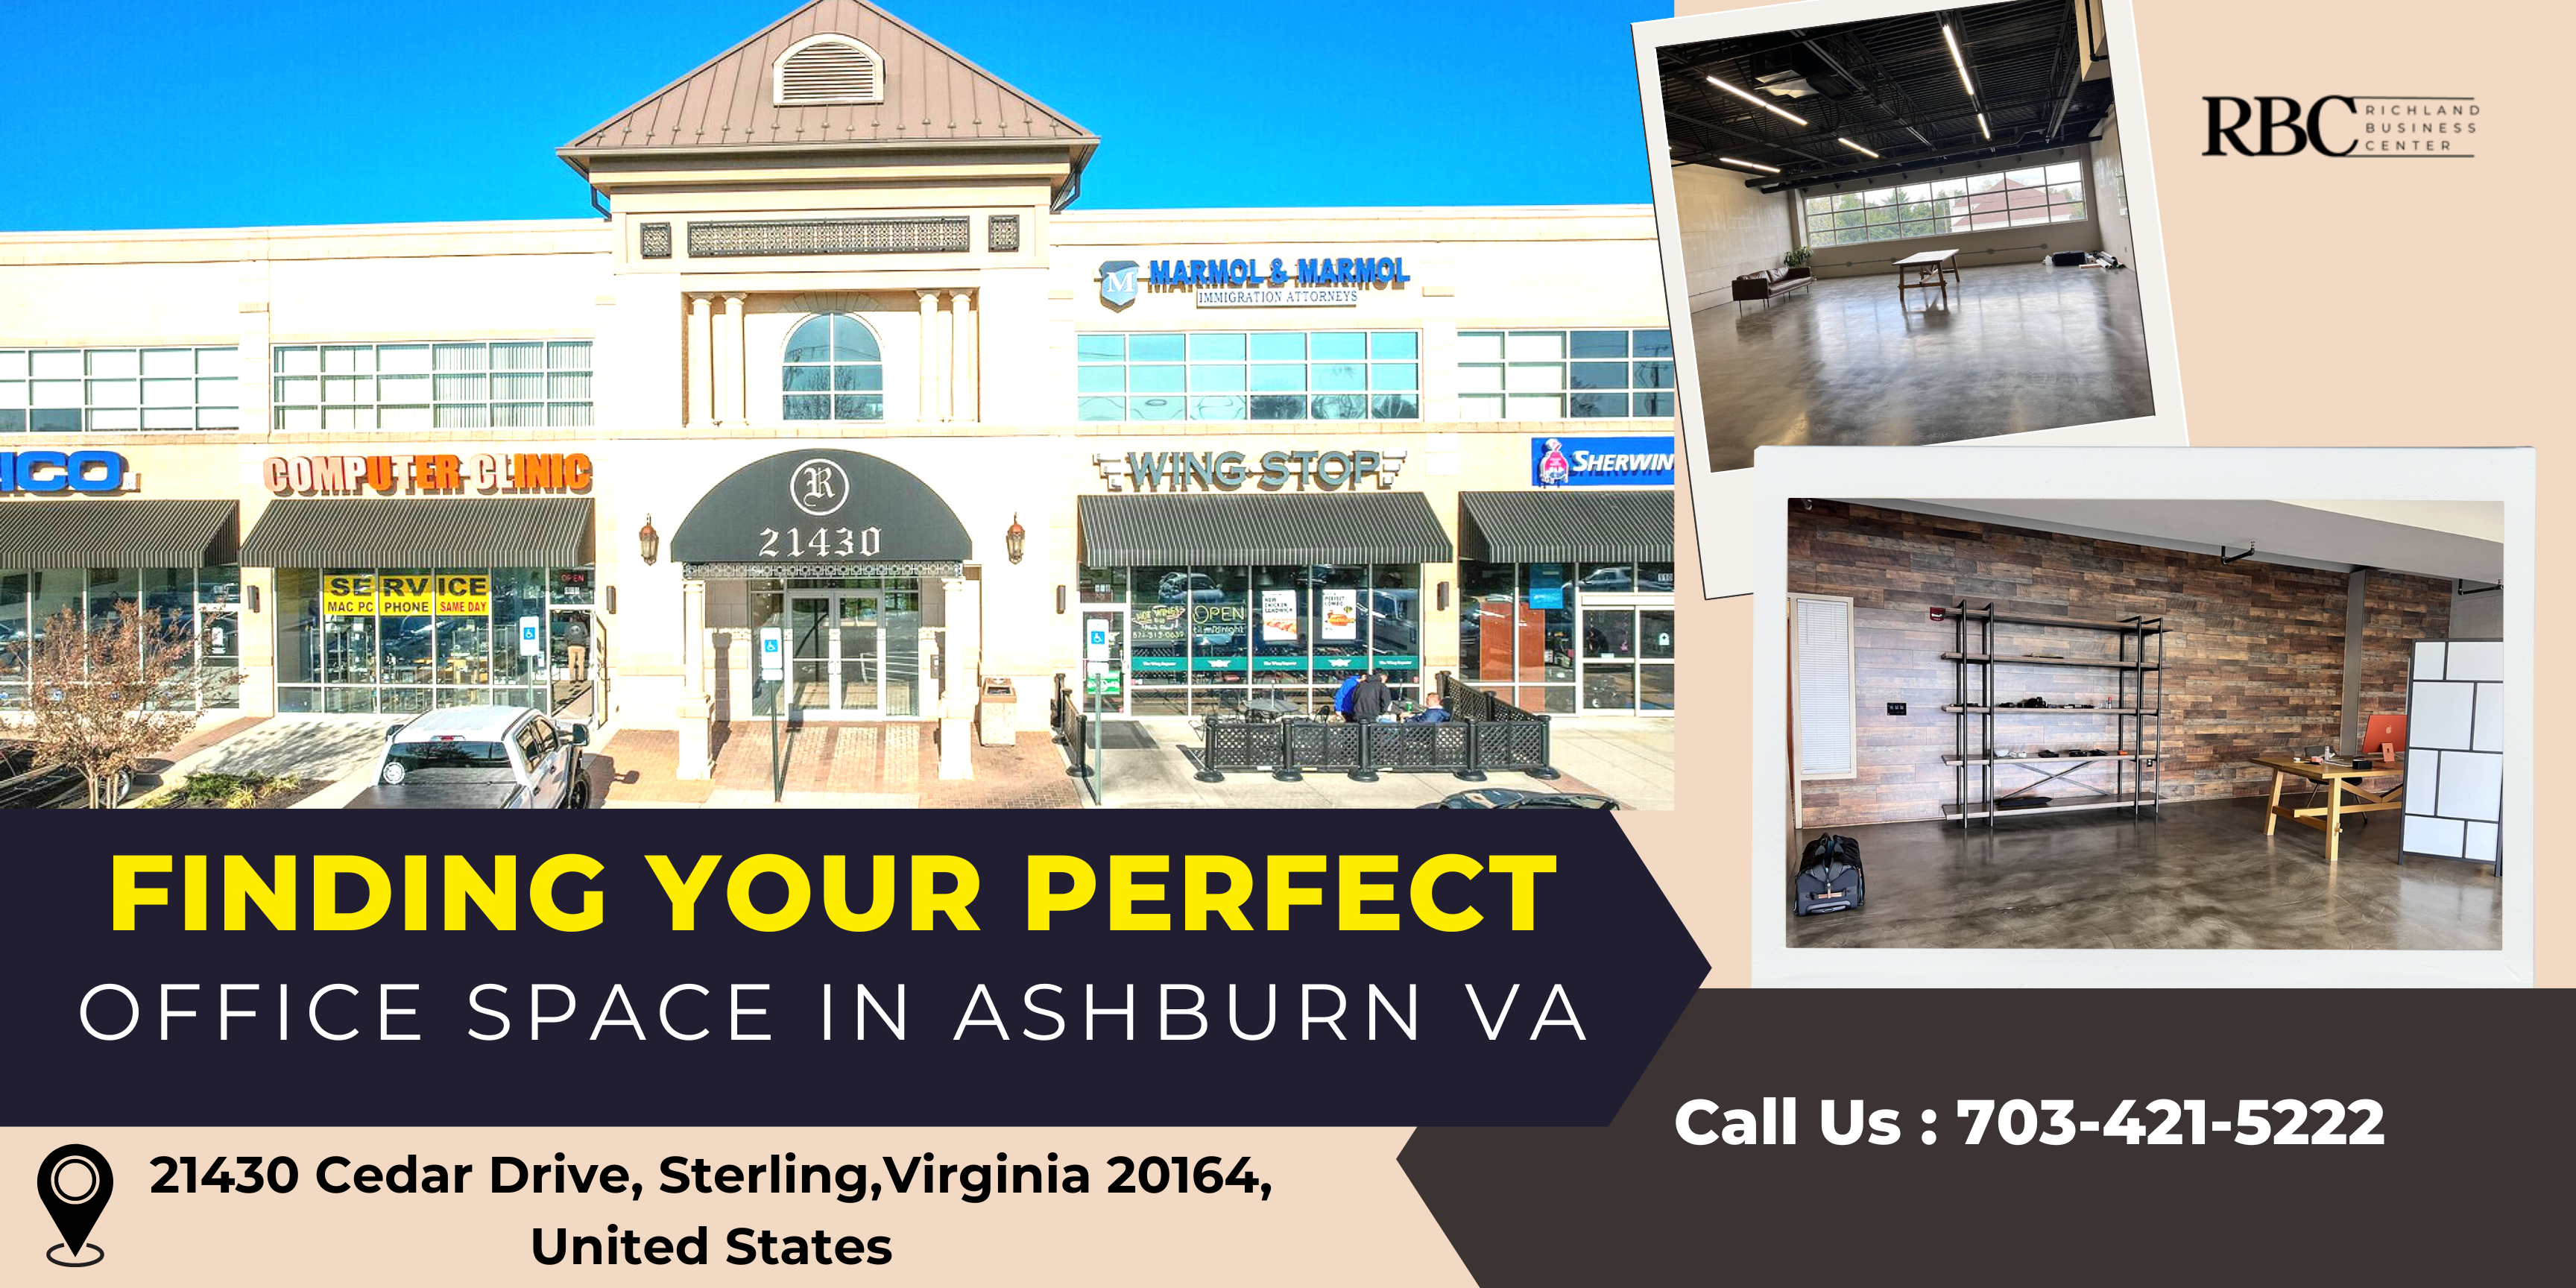 Finding Your Perfect Office Space Closed to Ashburn VA